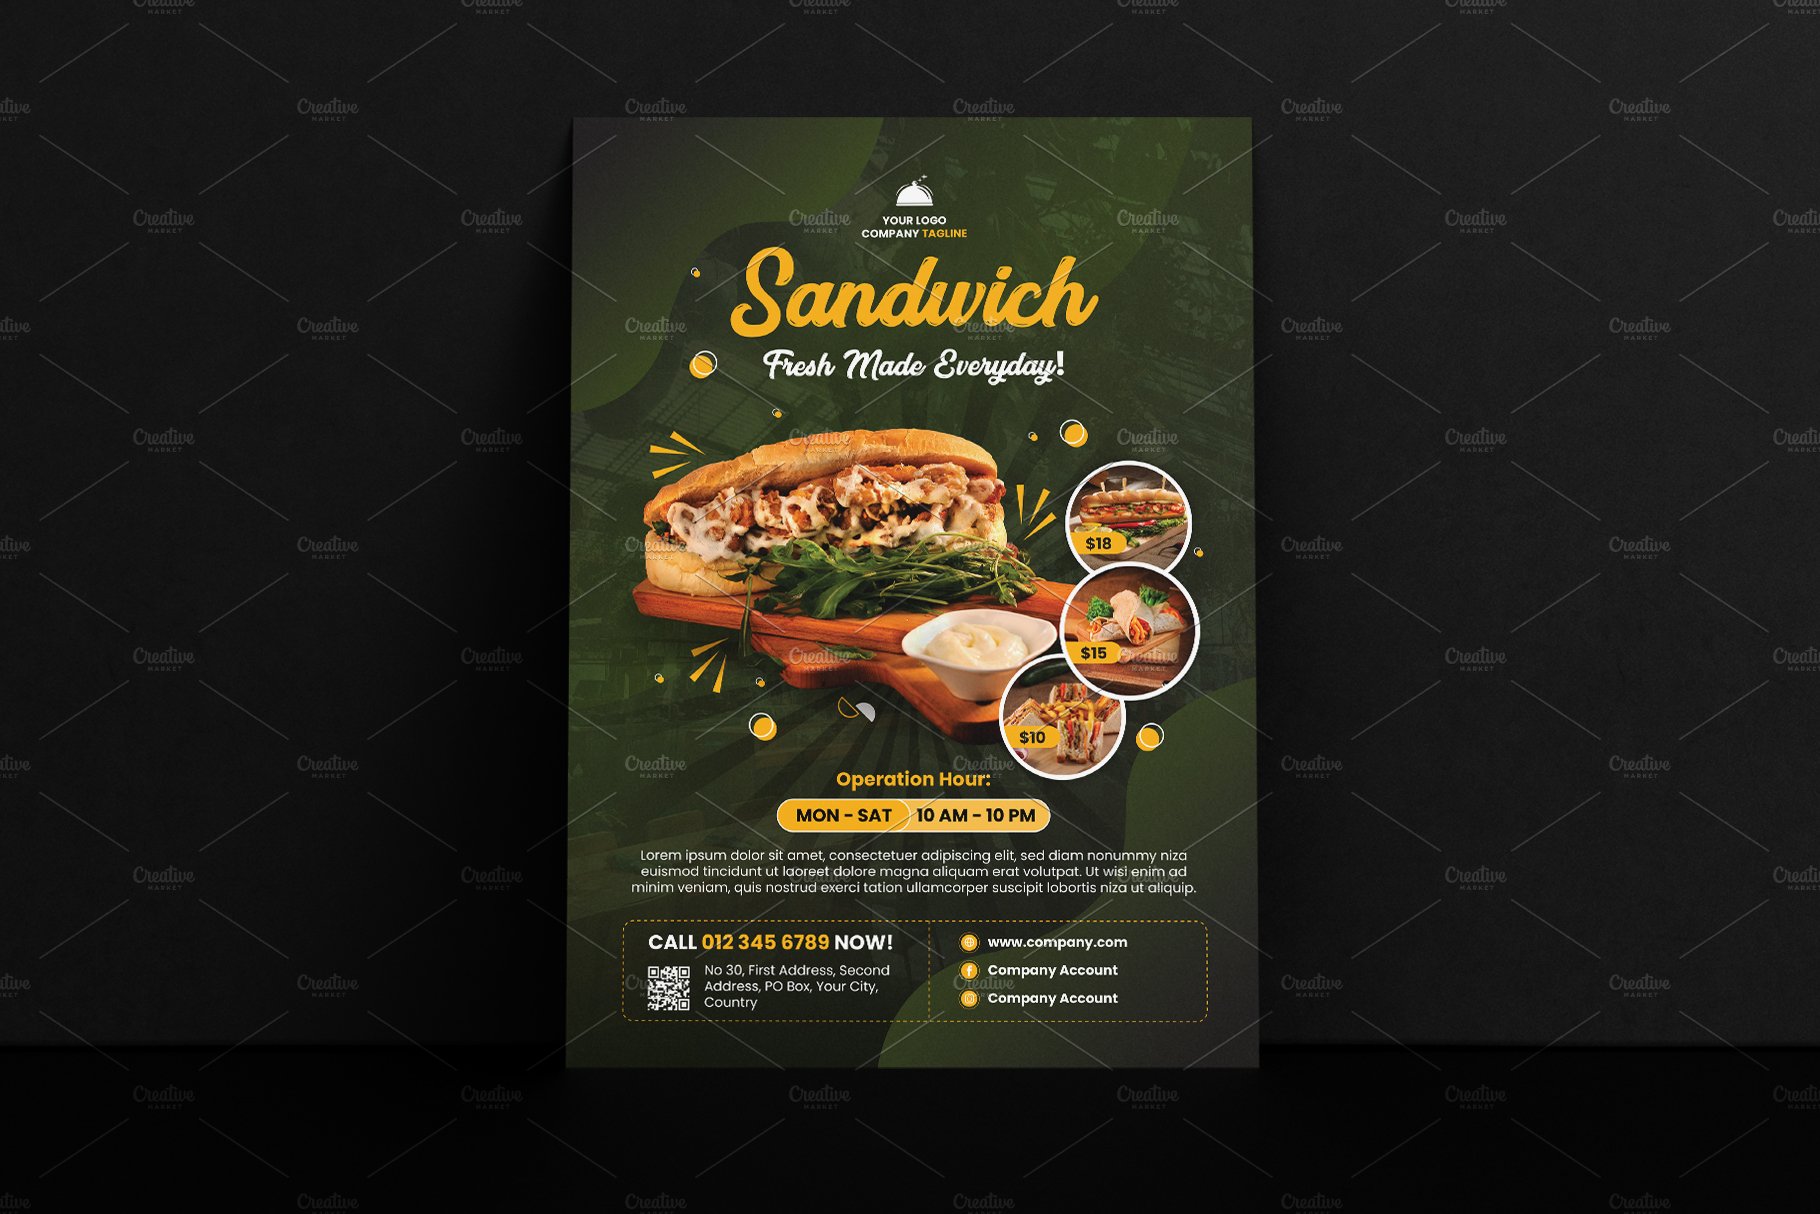 Food Restaurant Flyers Template cover image.